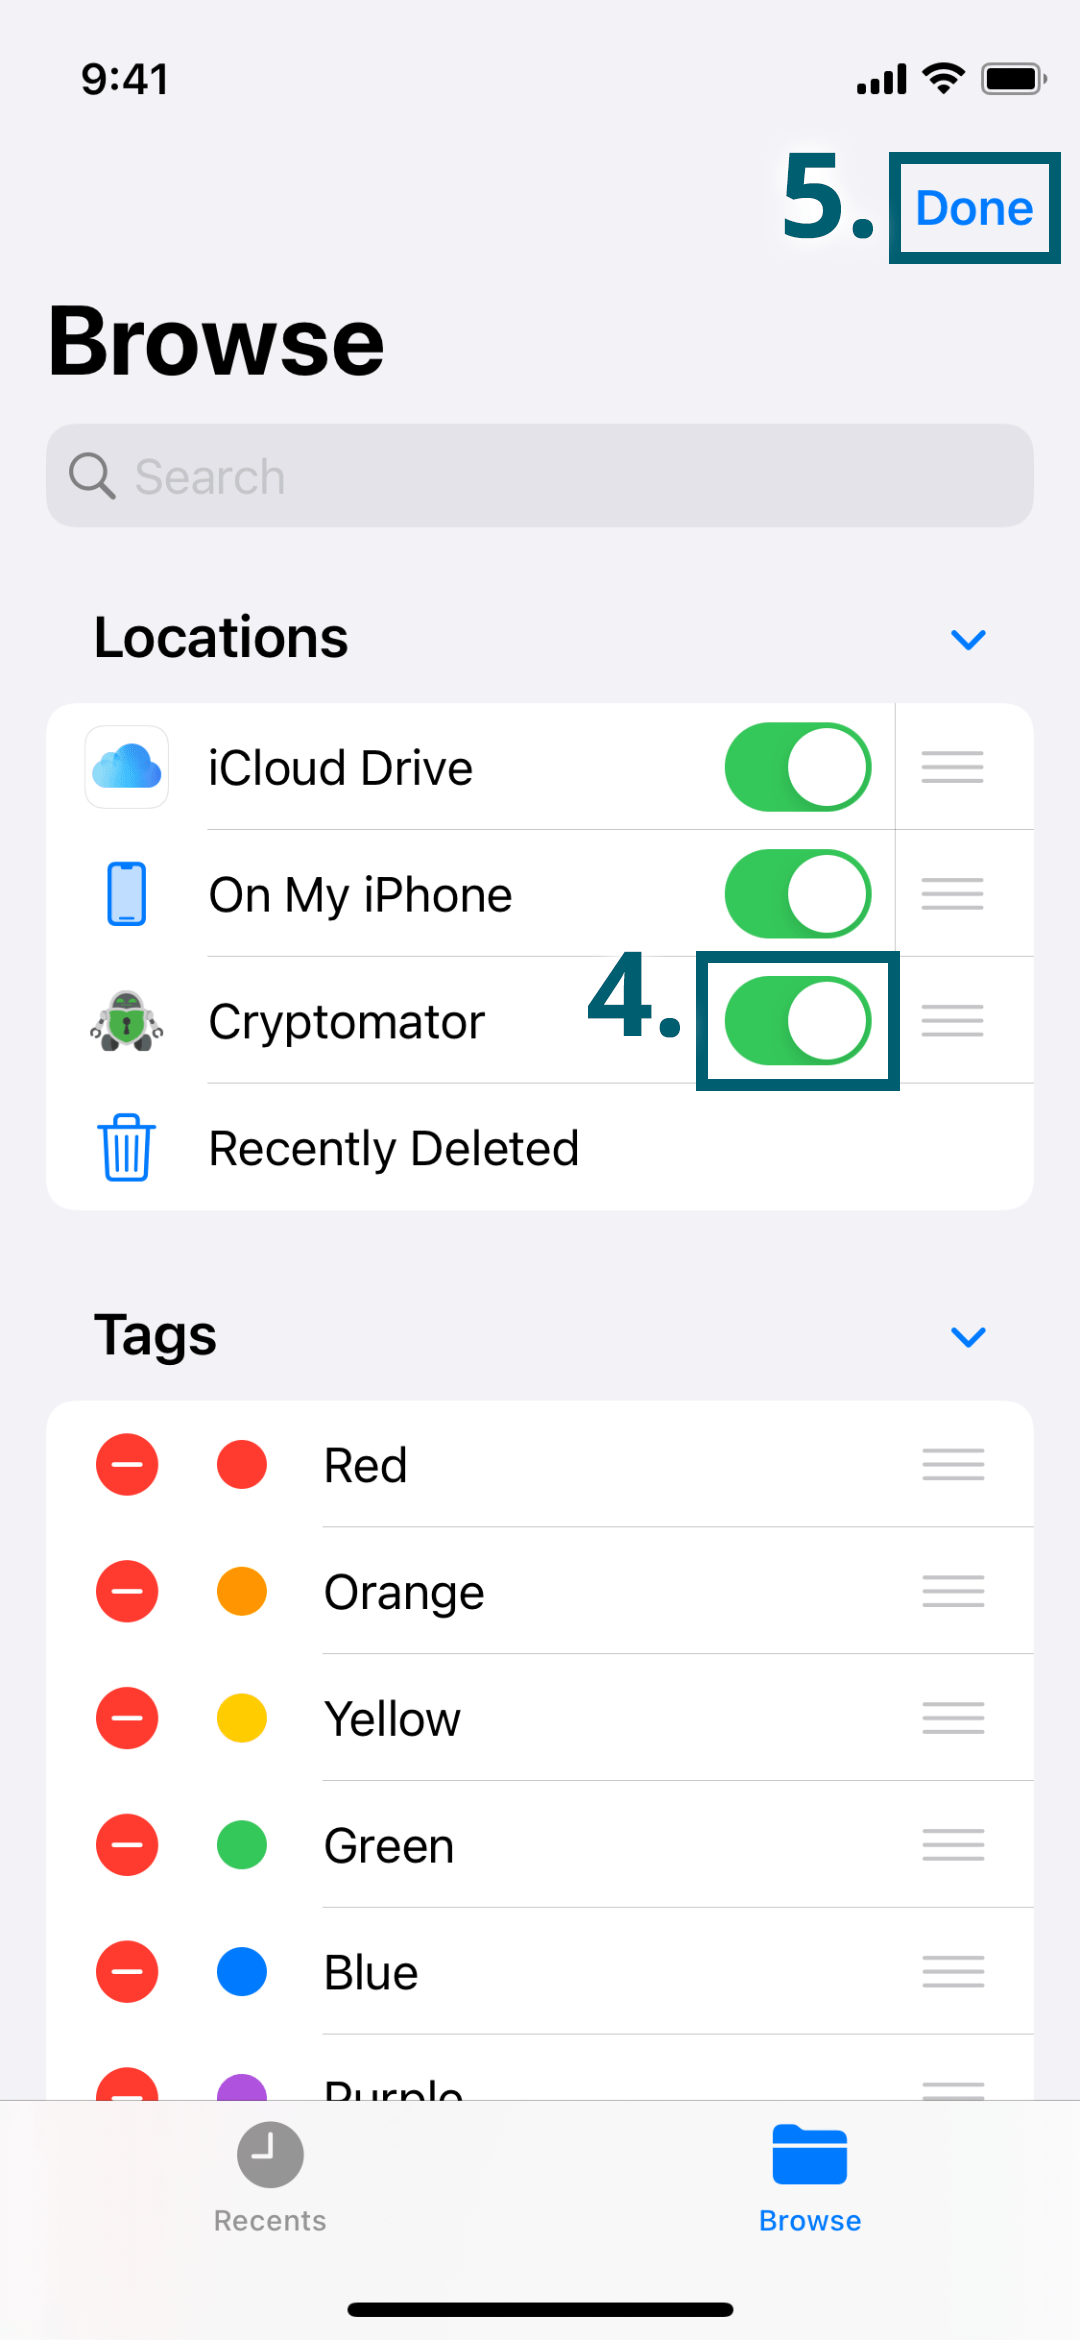 How to enable Cryptomator in Files app